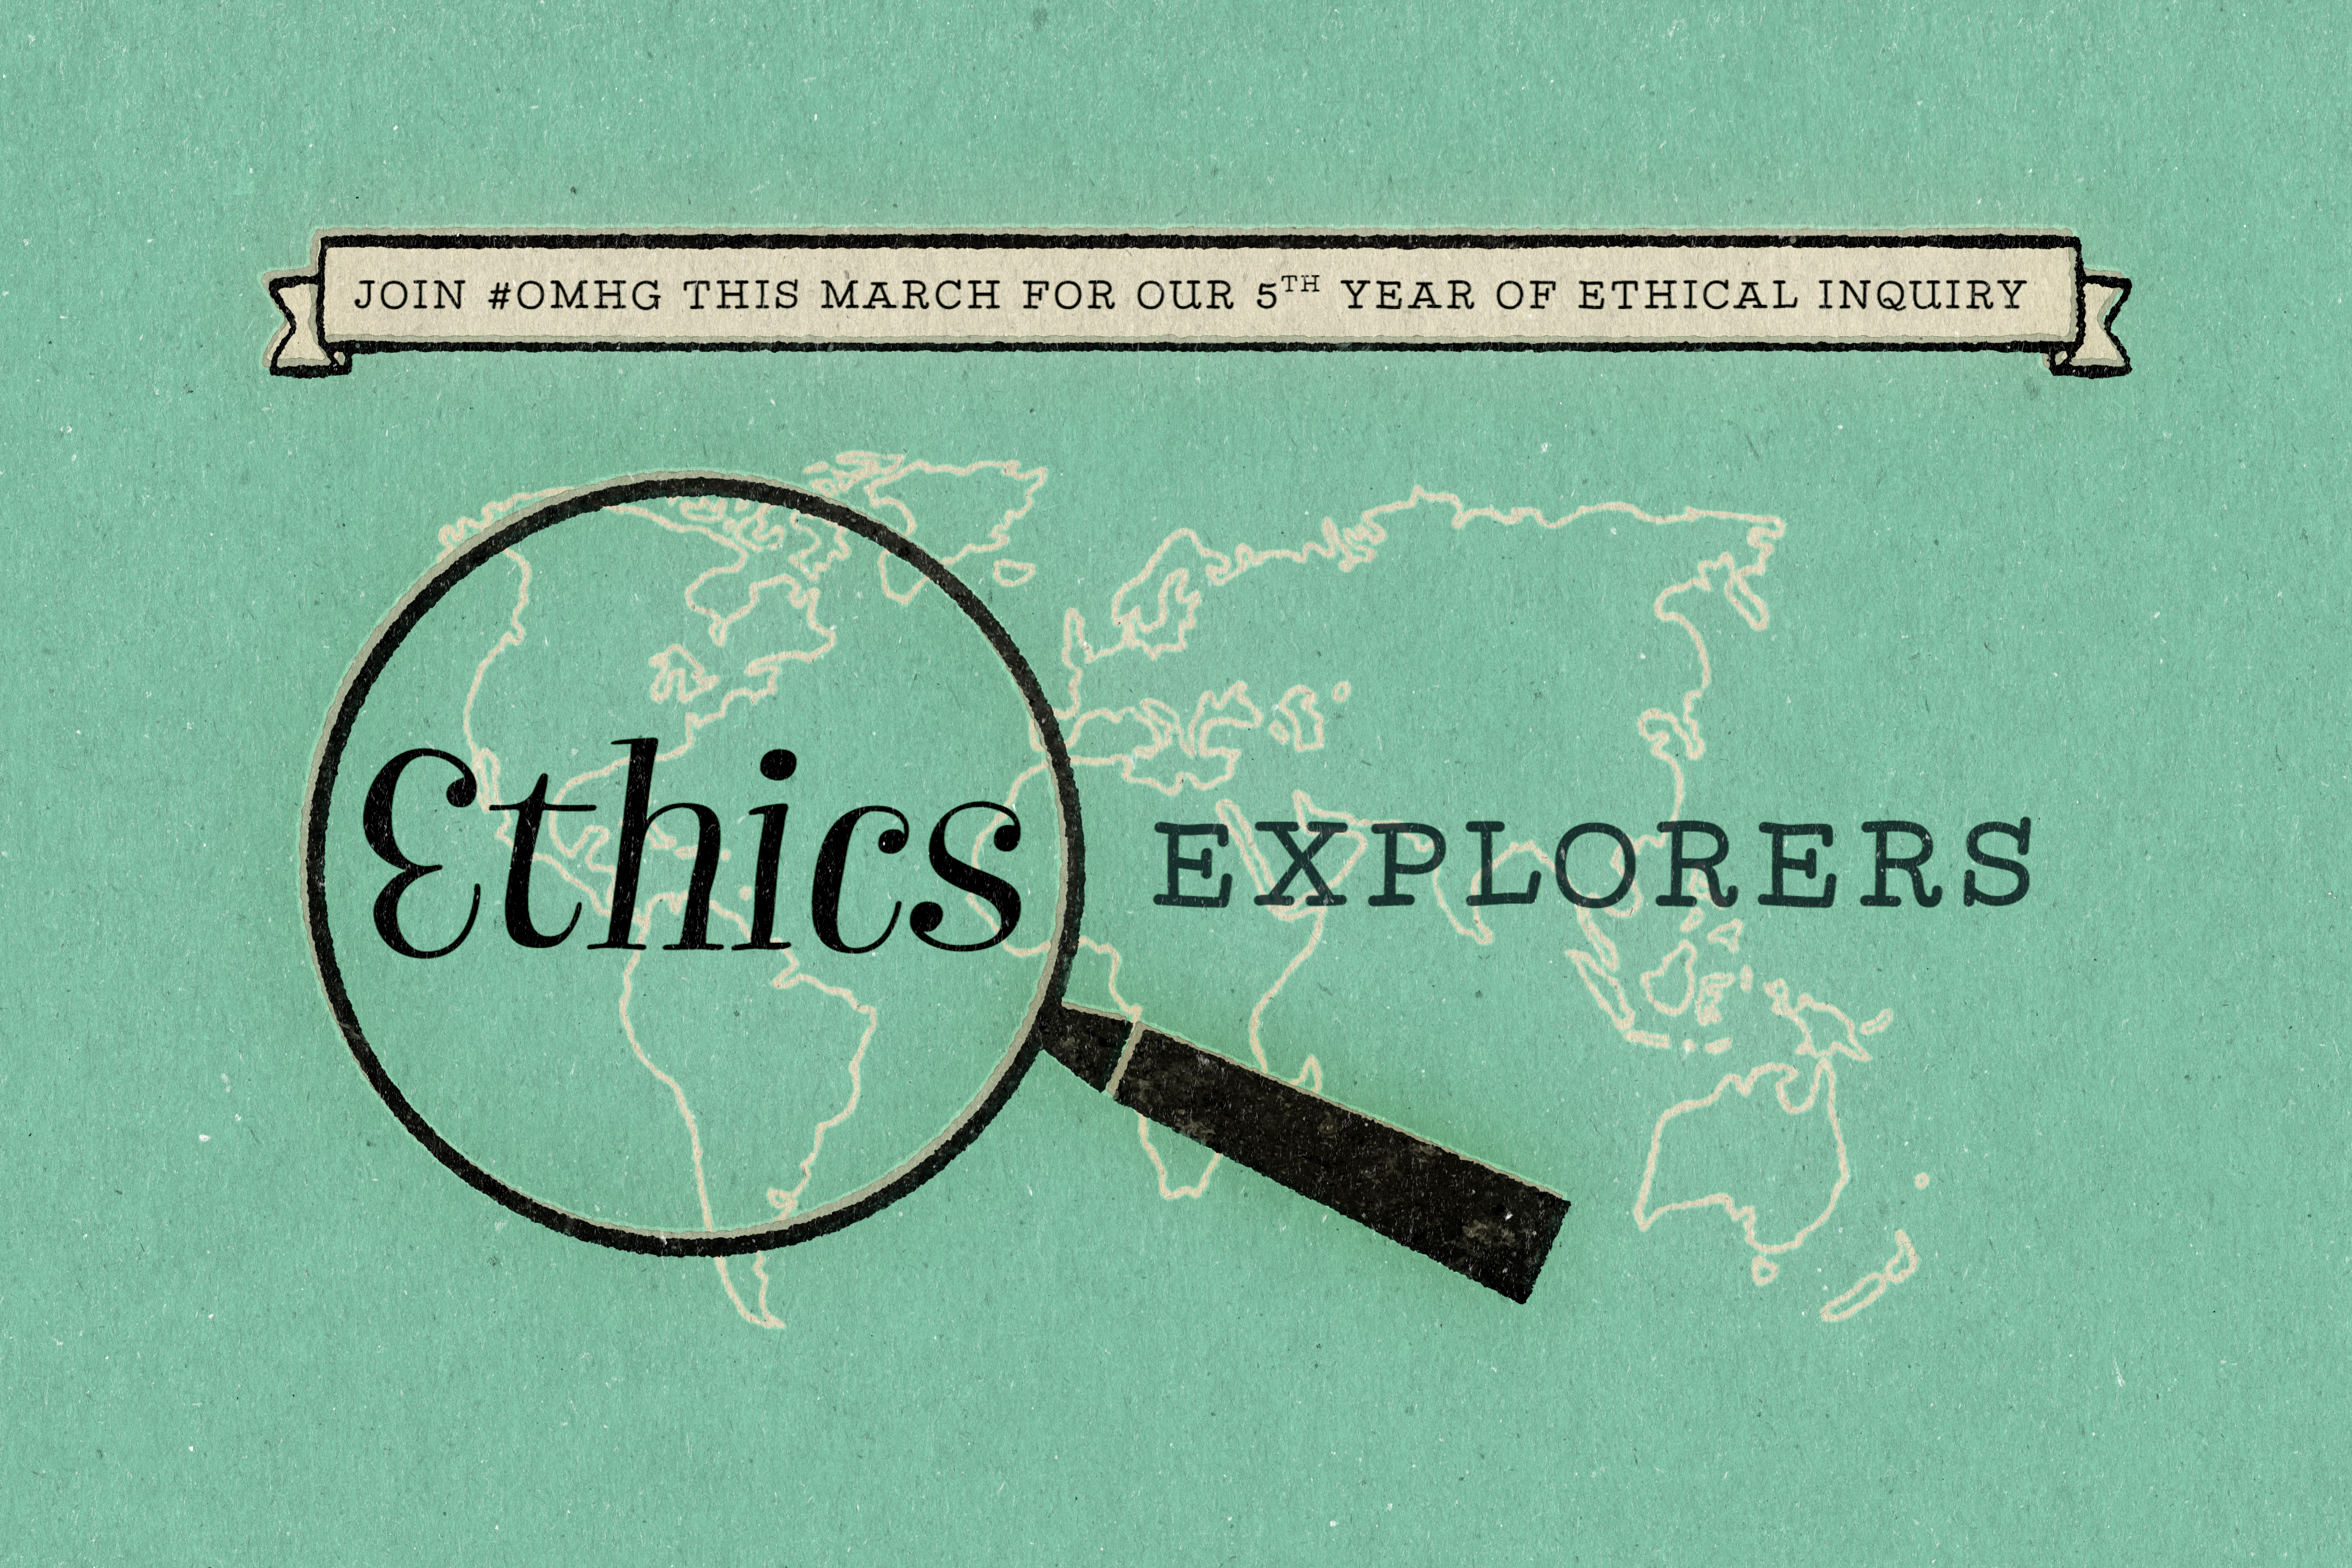 Ethics Explorers: OMHG's 5th Annual Ethical Inquiry